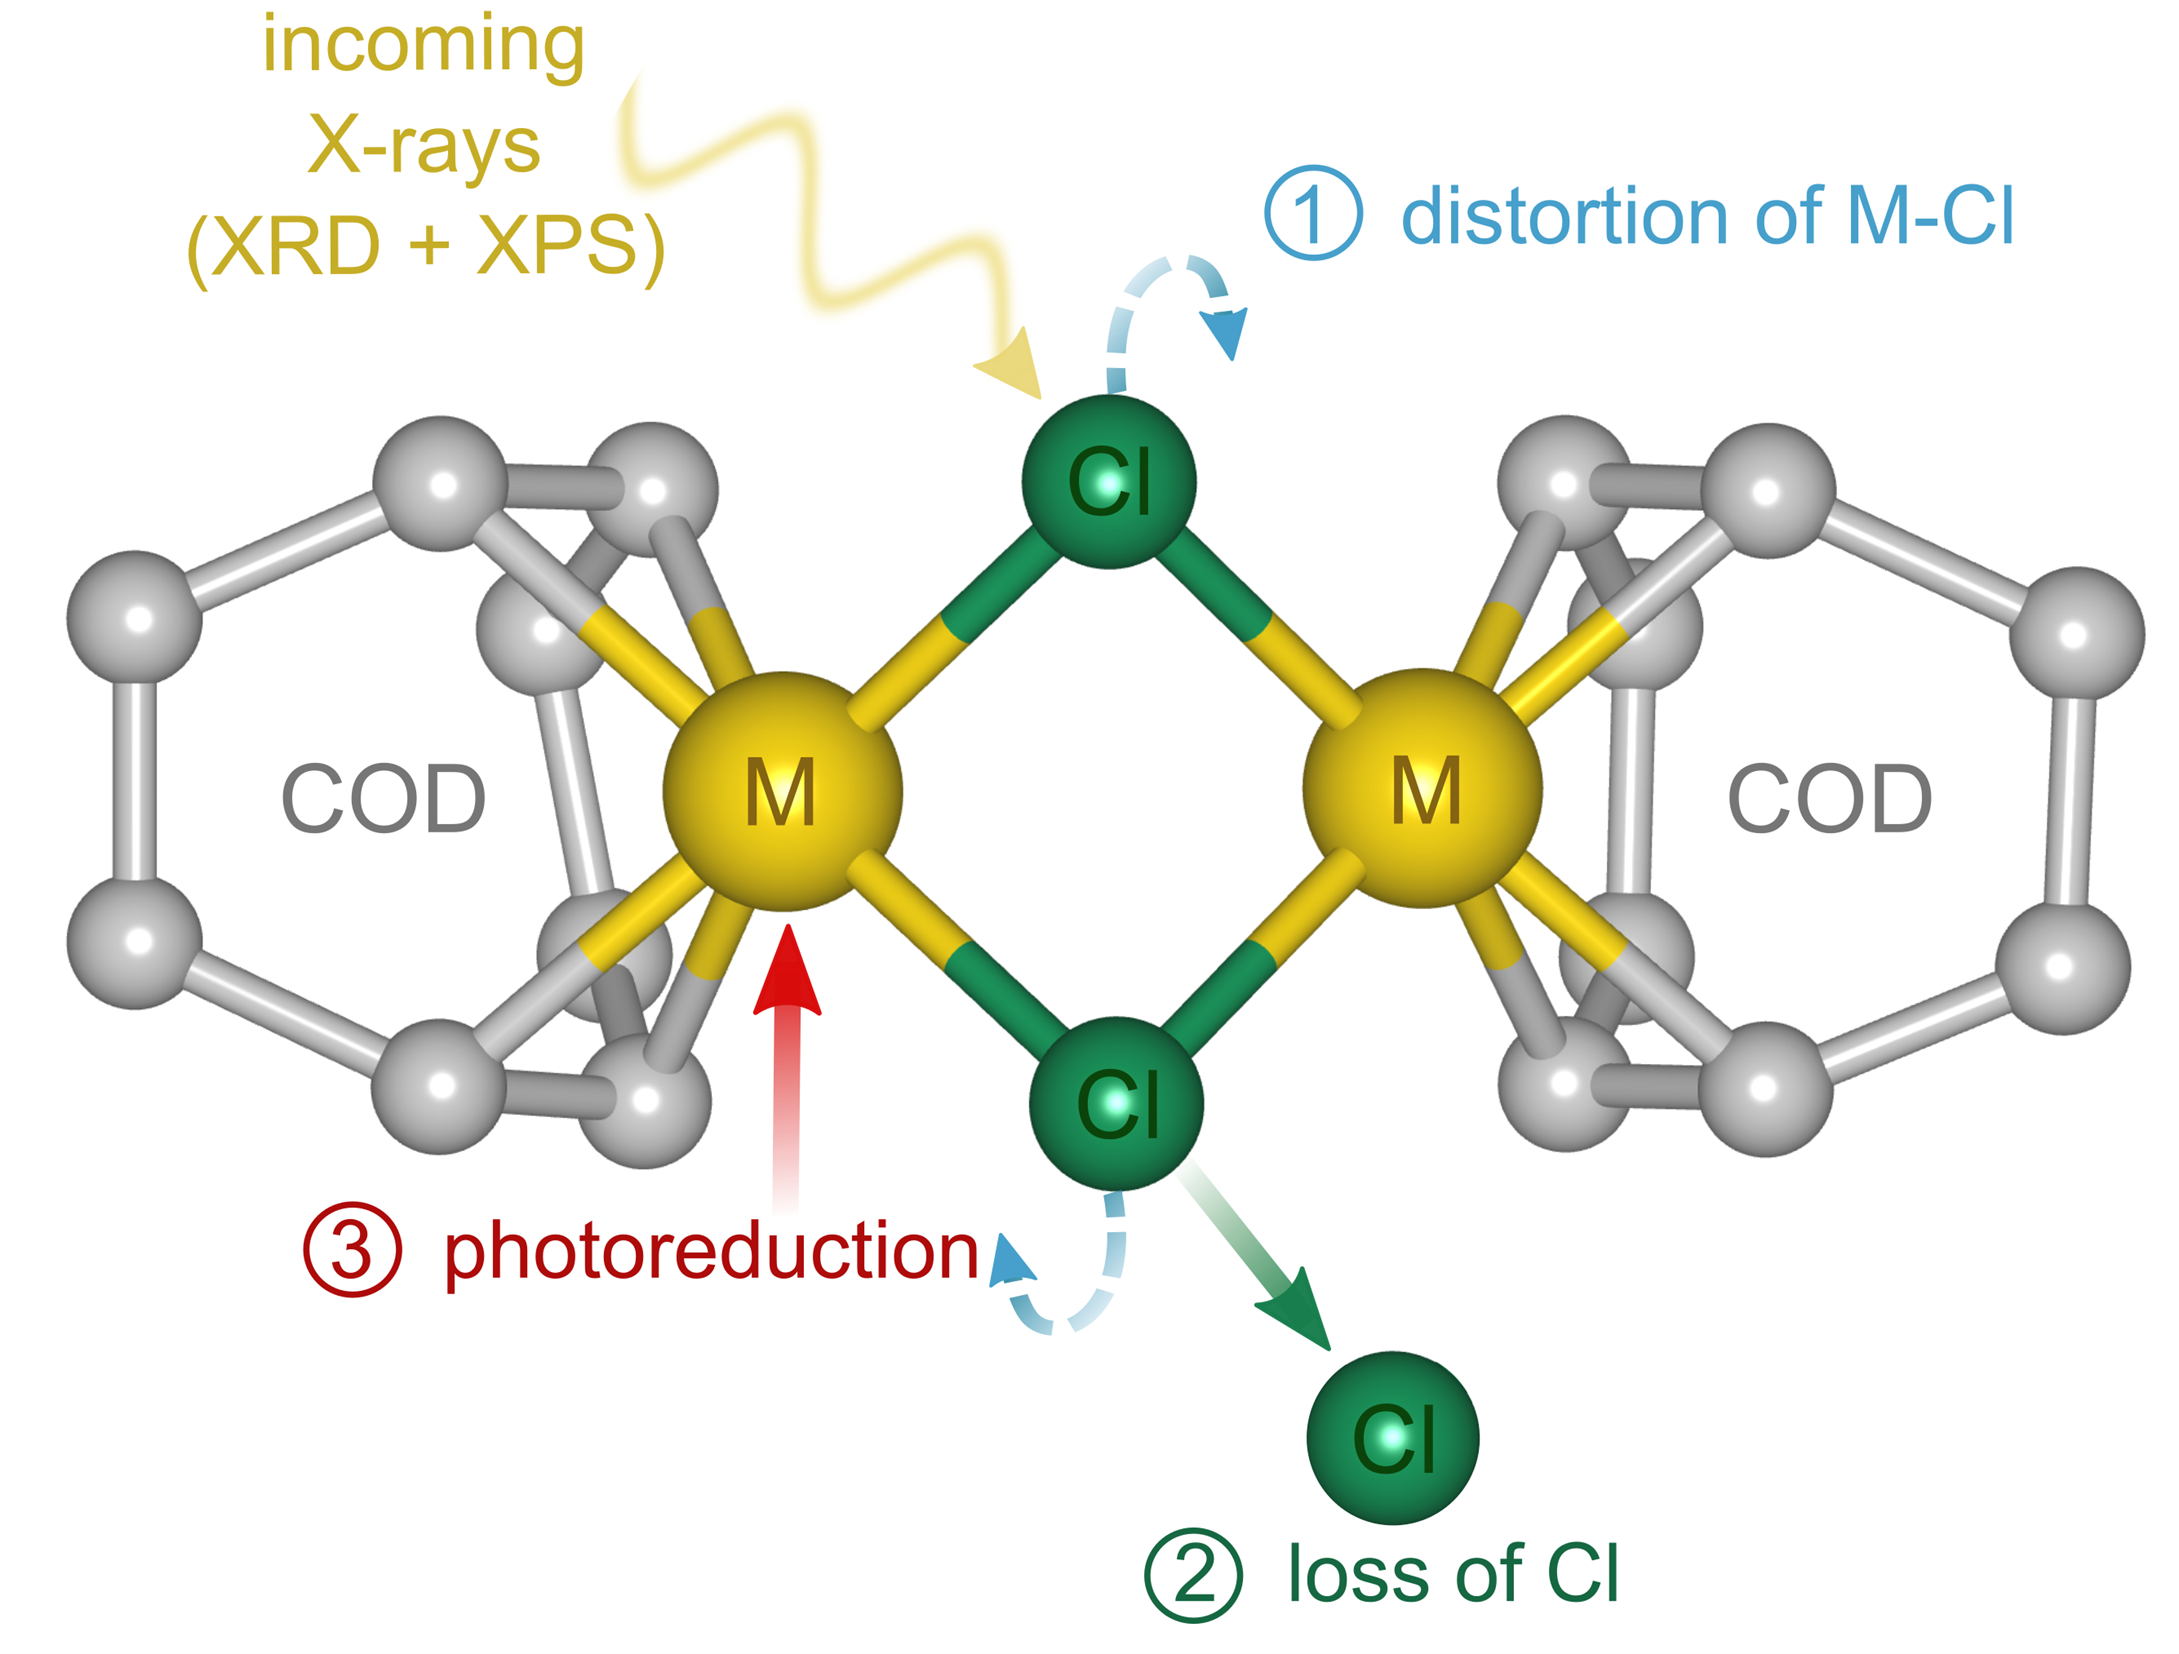 Schematic showing the molecular structure of [M(COD)Cl]2 and the different processes occurring upon X-ray irradiation during diffraction and photoelectron spectroscopy experiments.